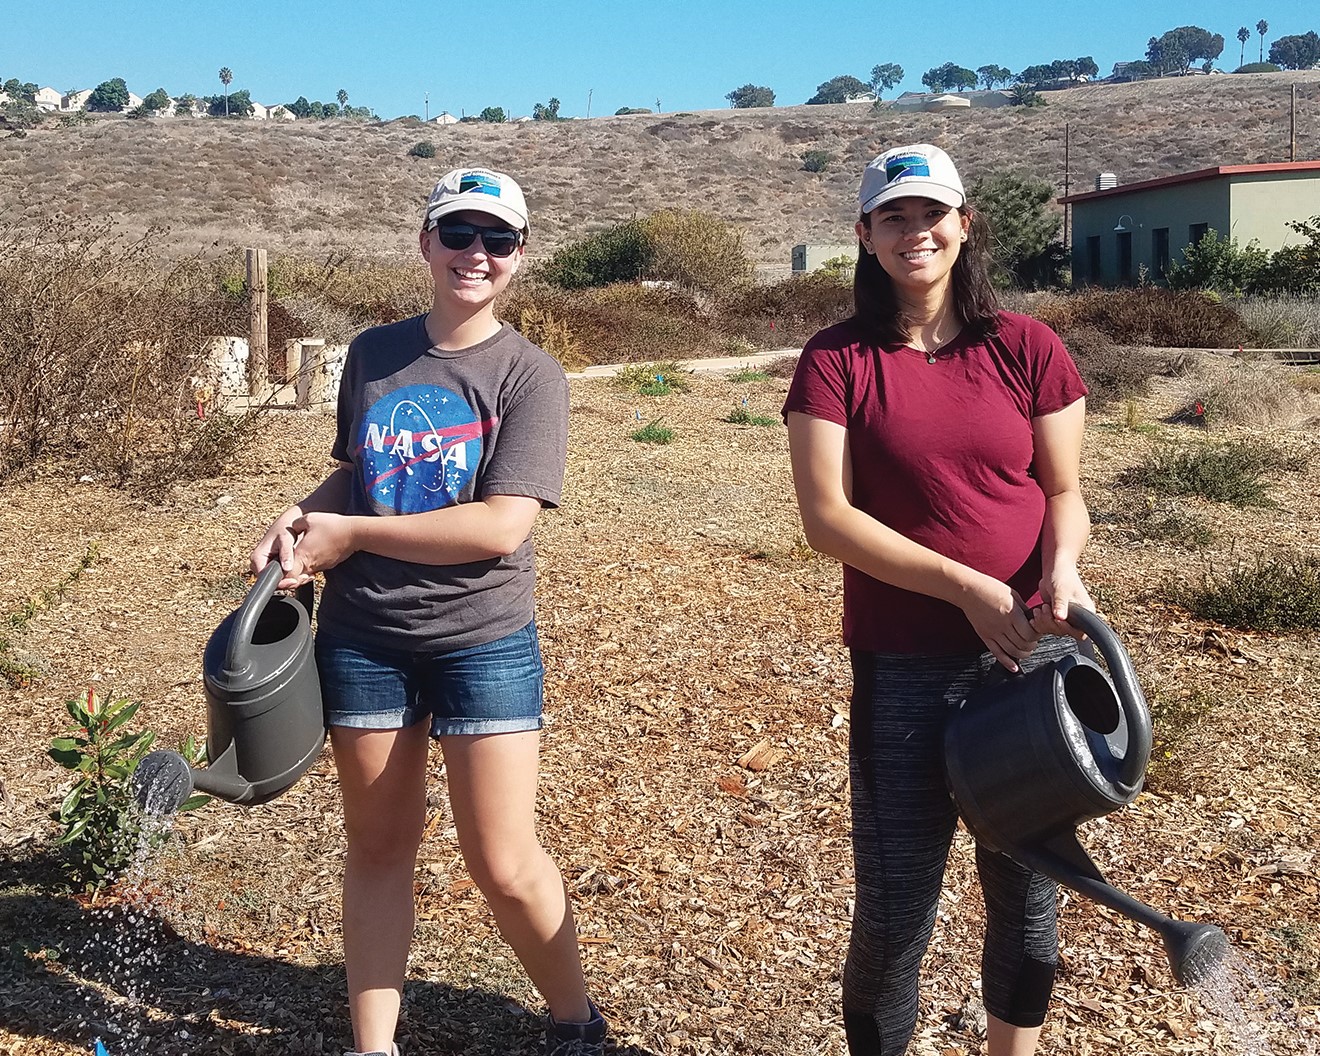 (L to R) Interns Nina House and Cambrie Congdon at White Point